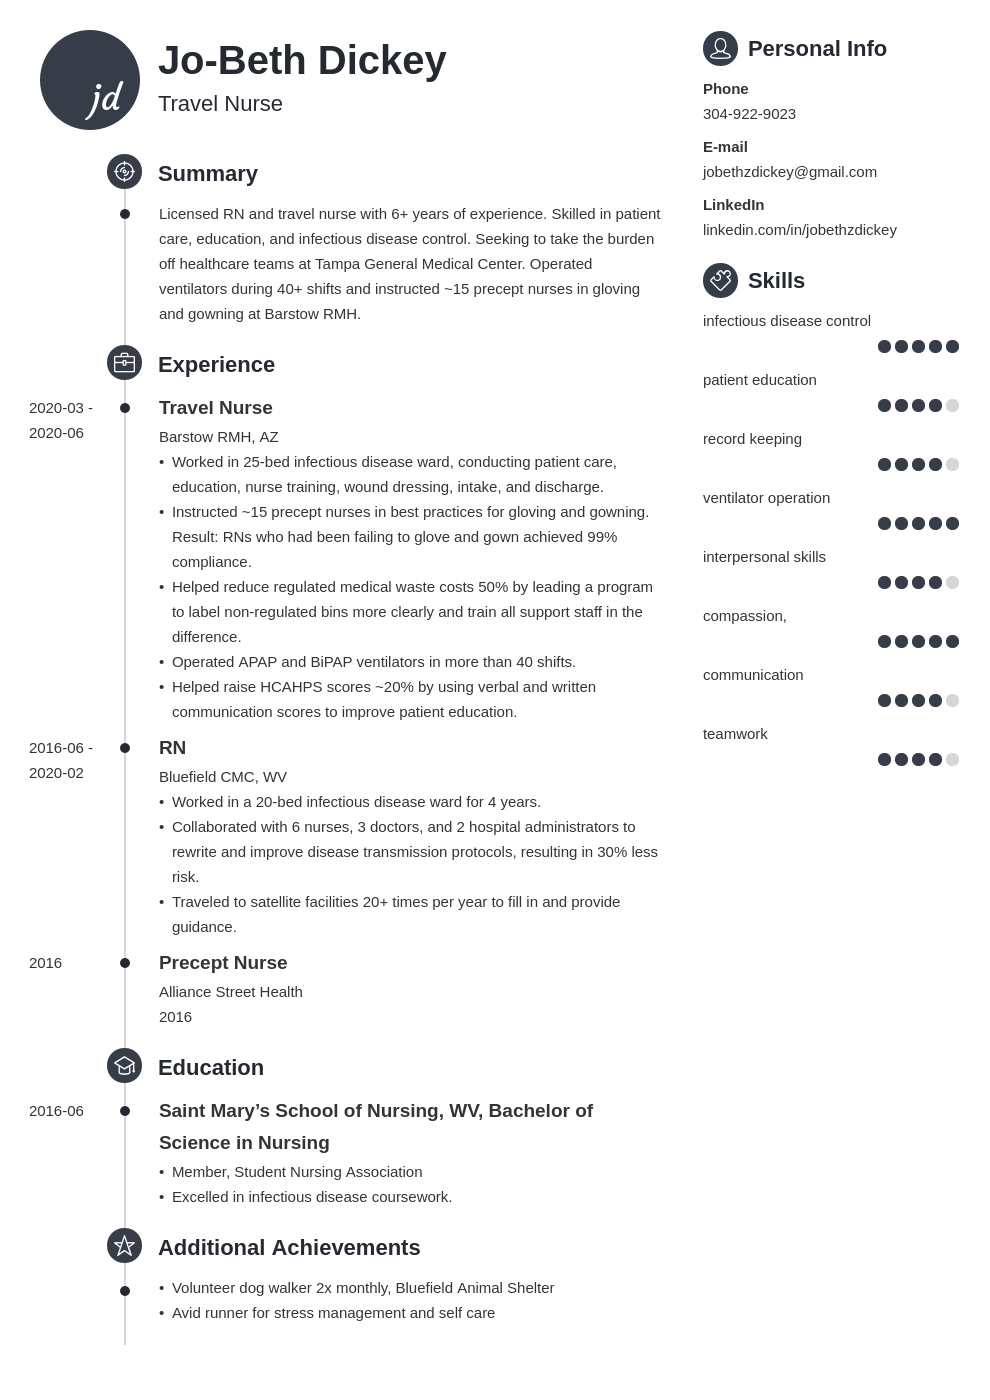 Travel Nurse Resume Examples and Guide [10+ Tips]